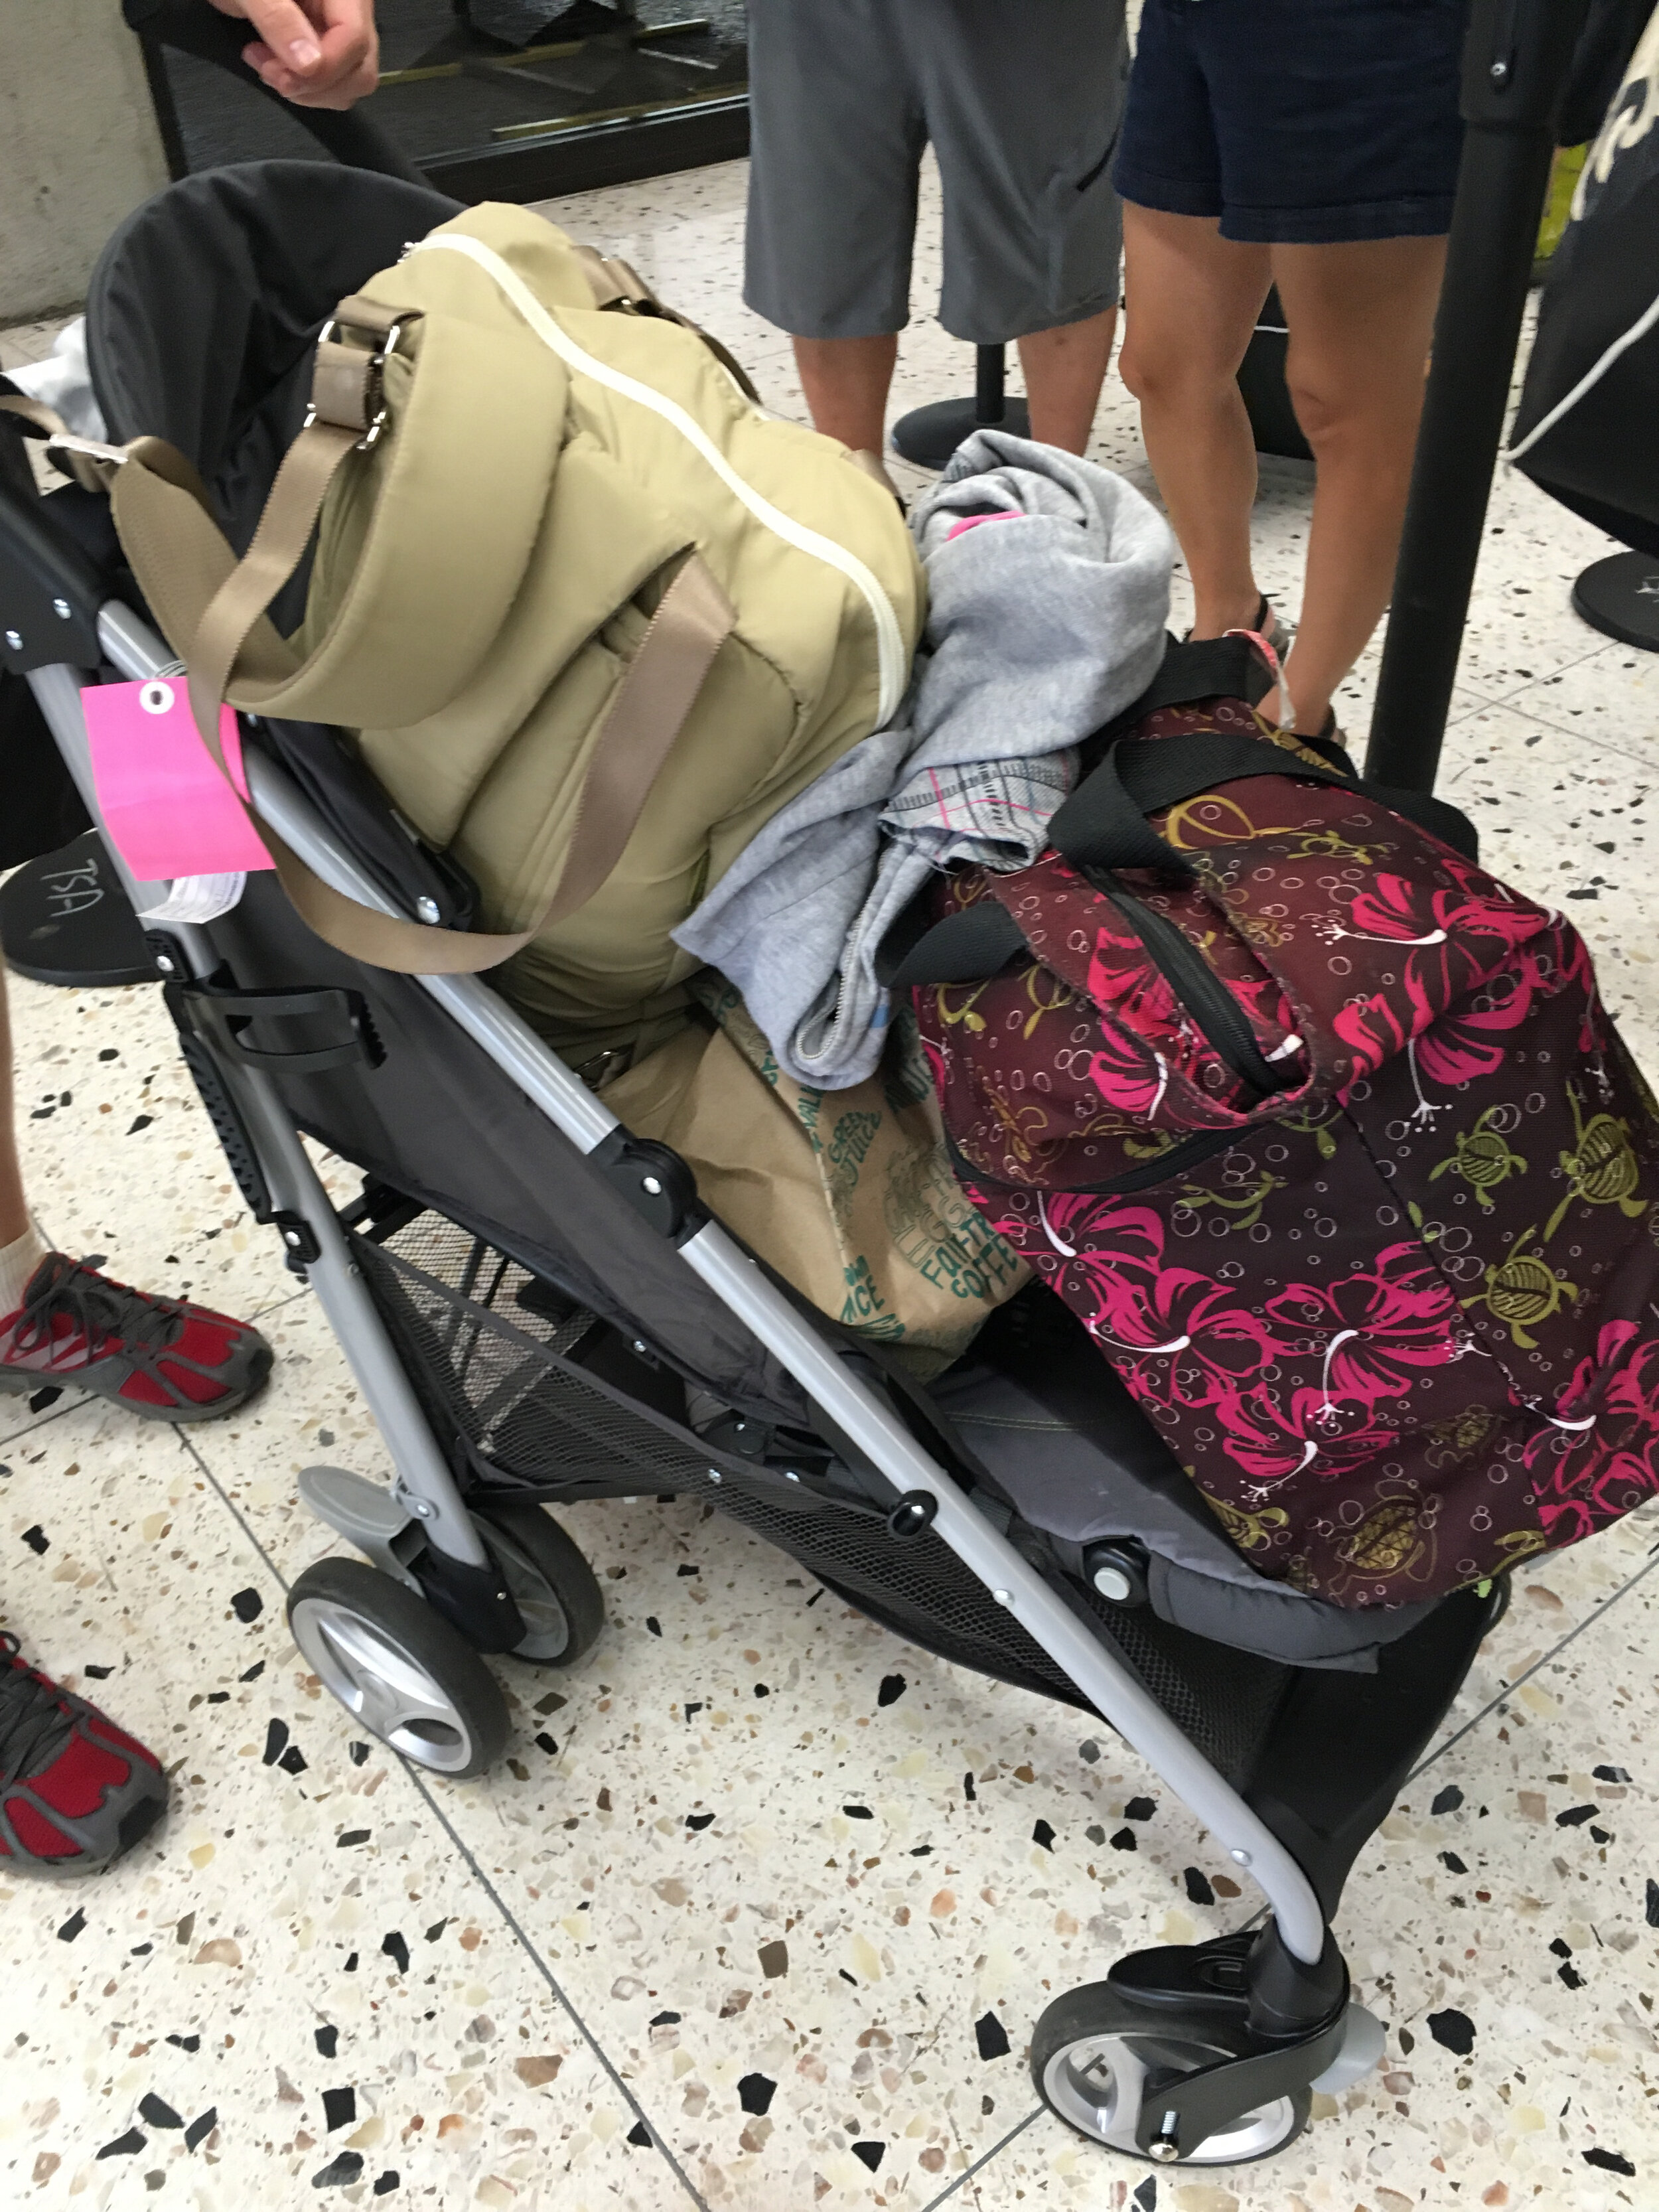 11 helpful tips on flying with a toddler, challenge accepted. Visit shortsweetmom.com for these helpful travel tips or pin for later. 